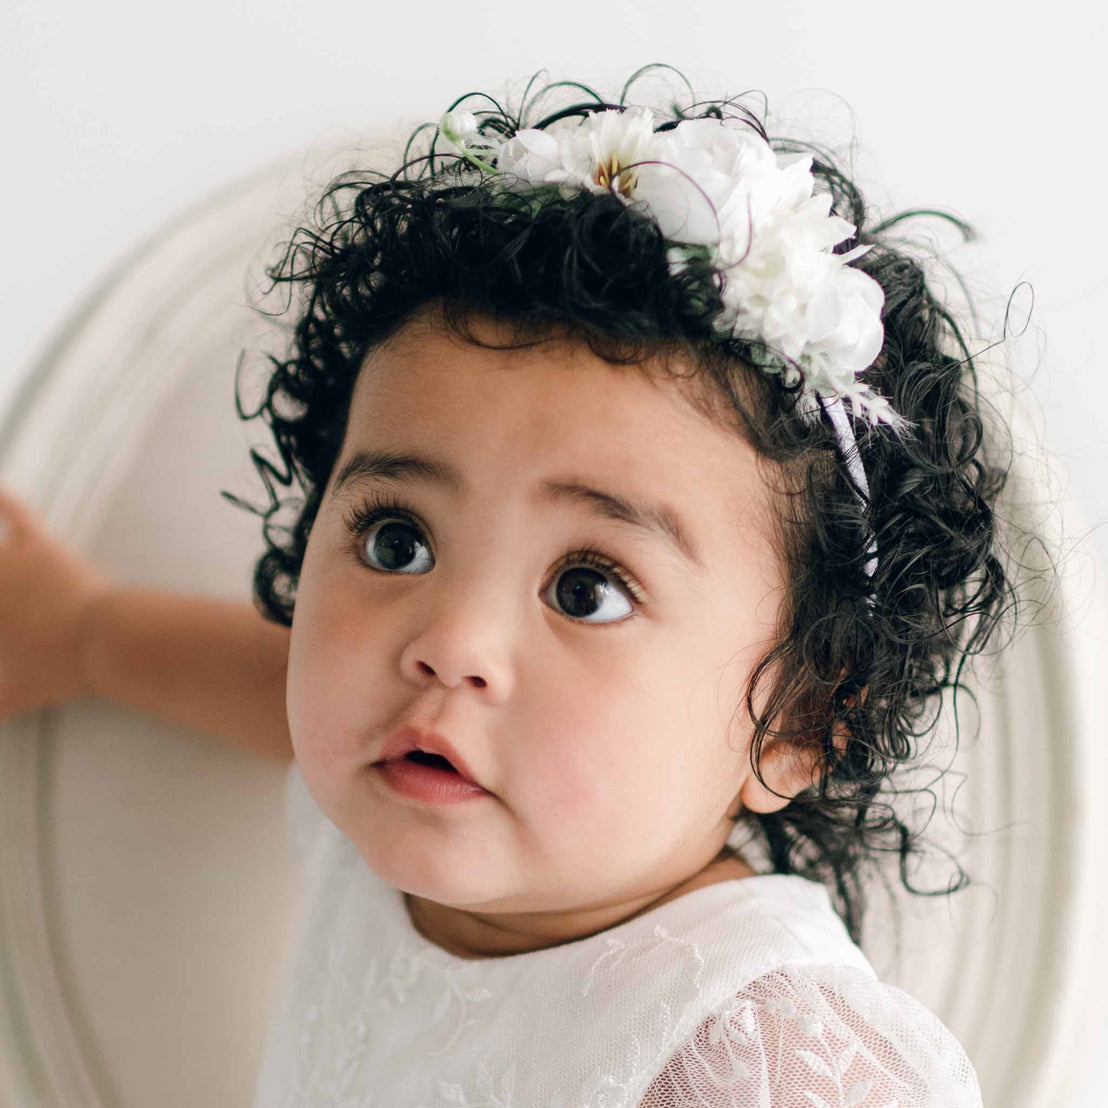 A baby girl with curly hair looks slightly upward with a curious expression. The child wears the Ella Romper Dress and an Ella Flower Headband made of white flowers. The girl rests one hand on a piece of furniture.